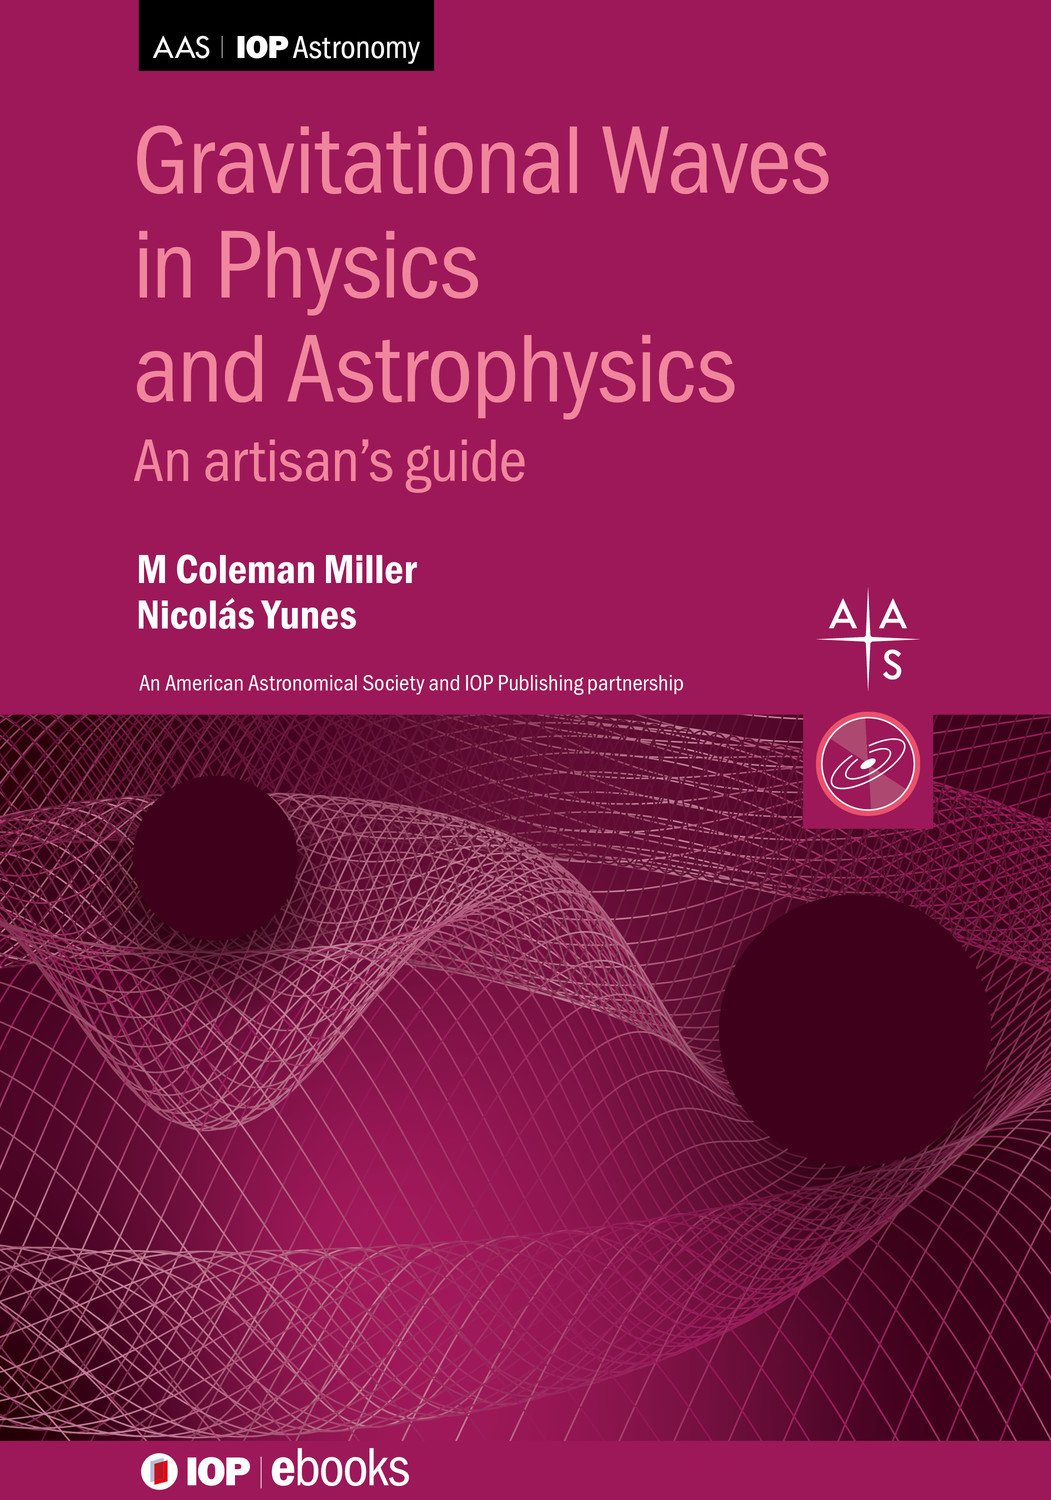 Gravitational Waves in Physics and Astrophysics ebook cover